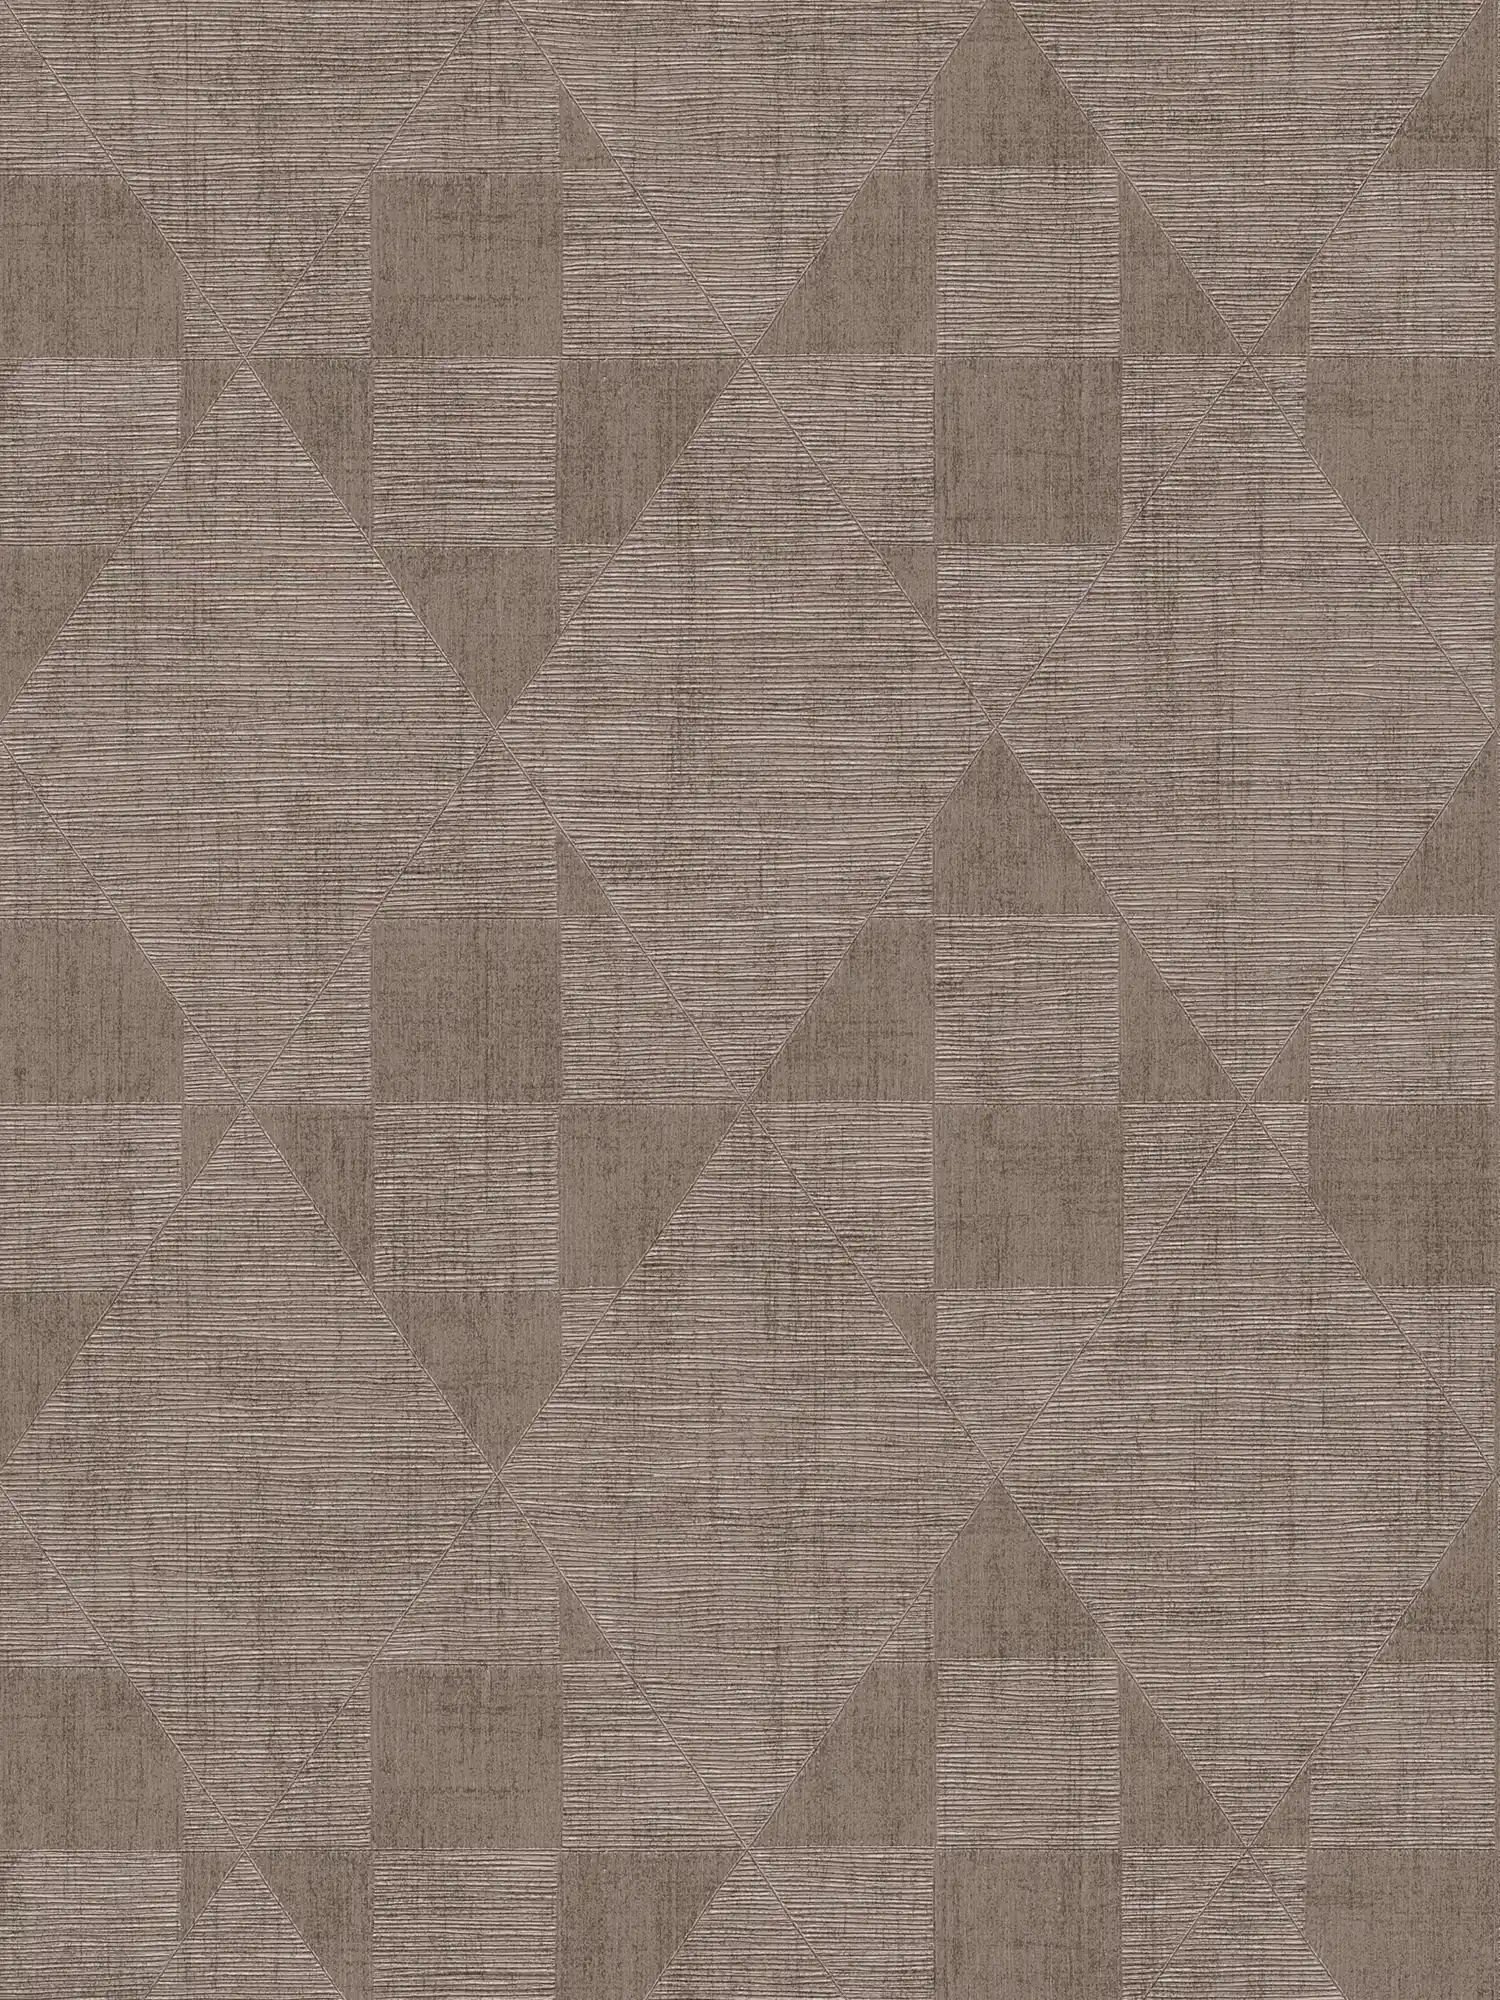 Melted wallpaper dark brown with retro pattern - brown
